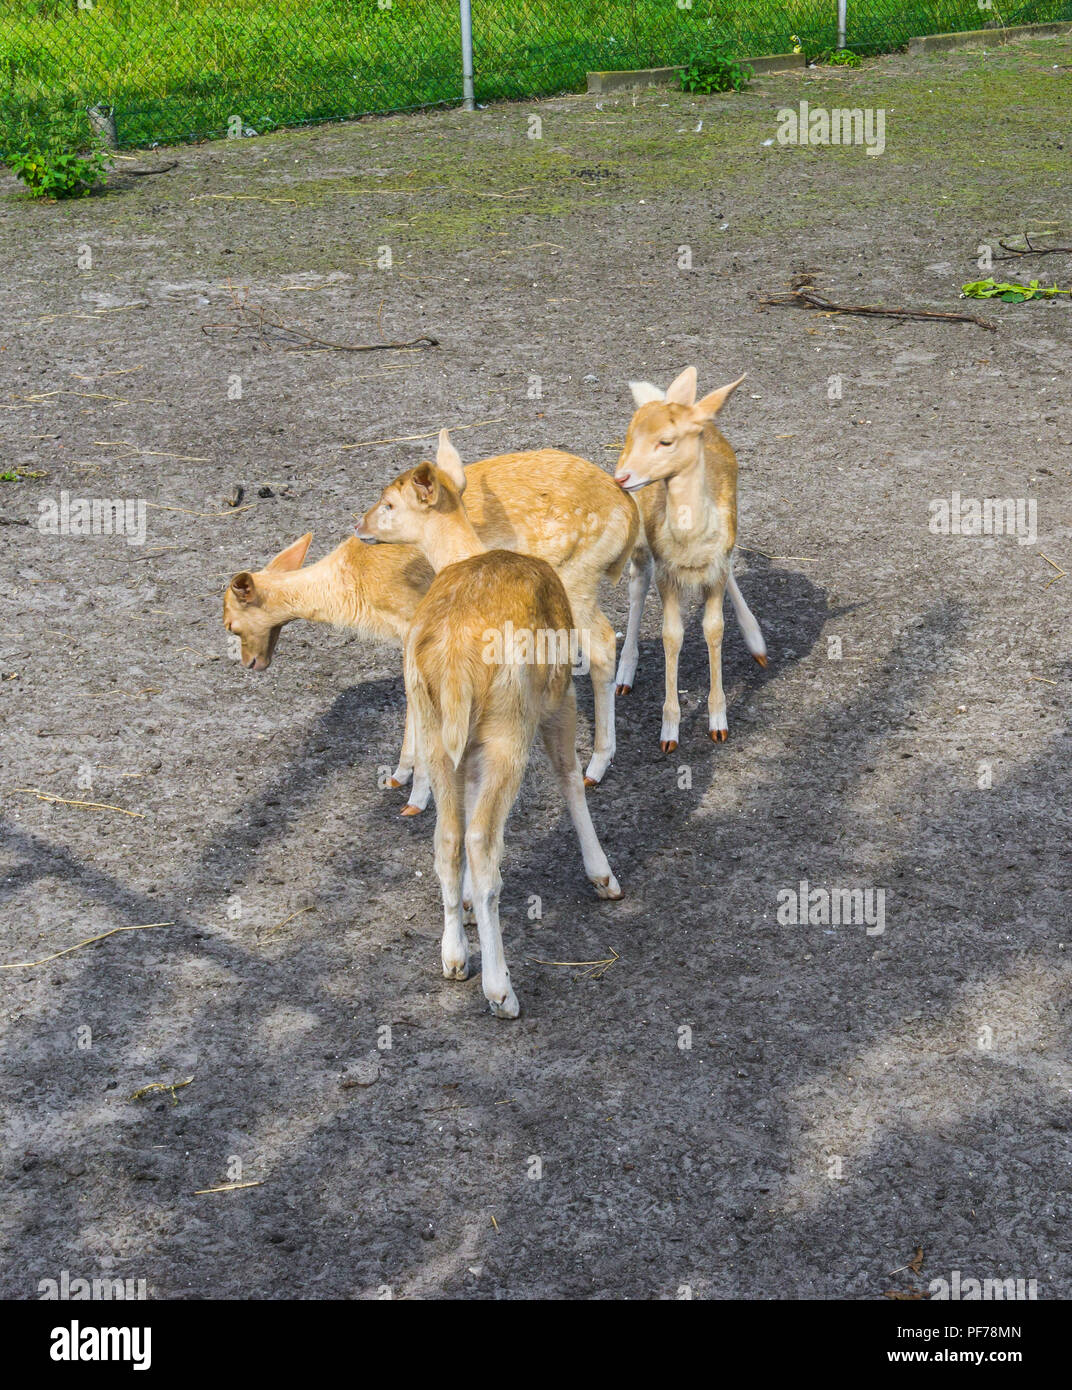 small young deers group animals farm Stock Photo